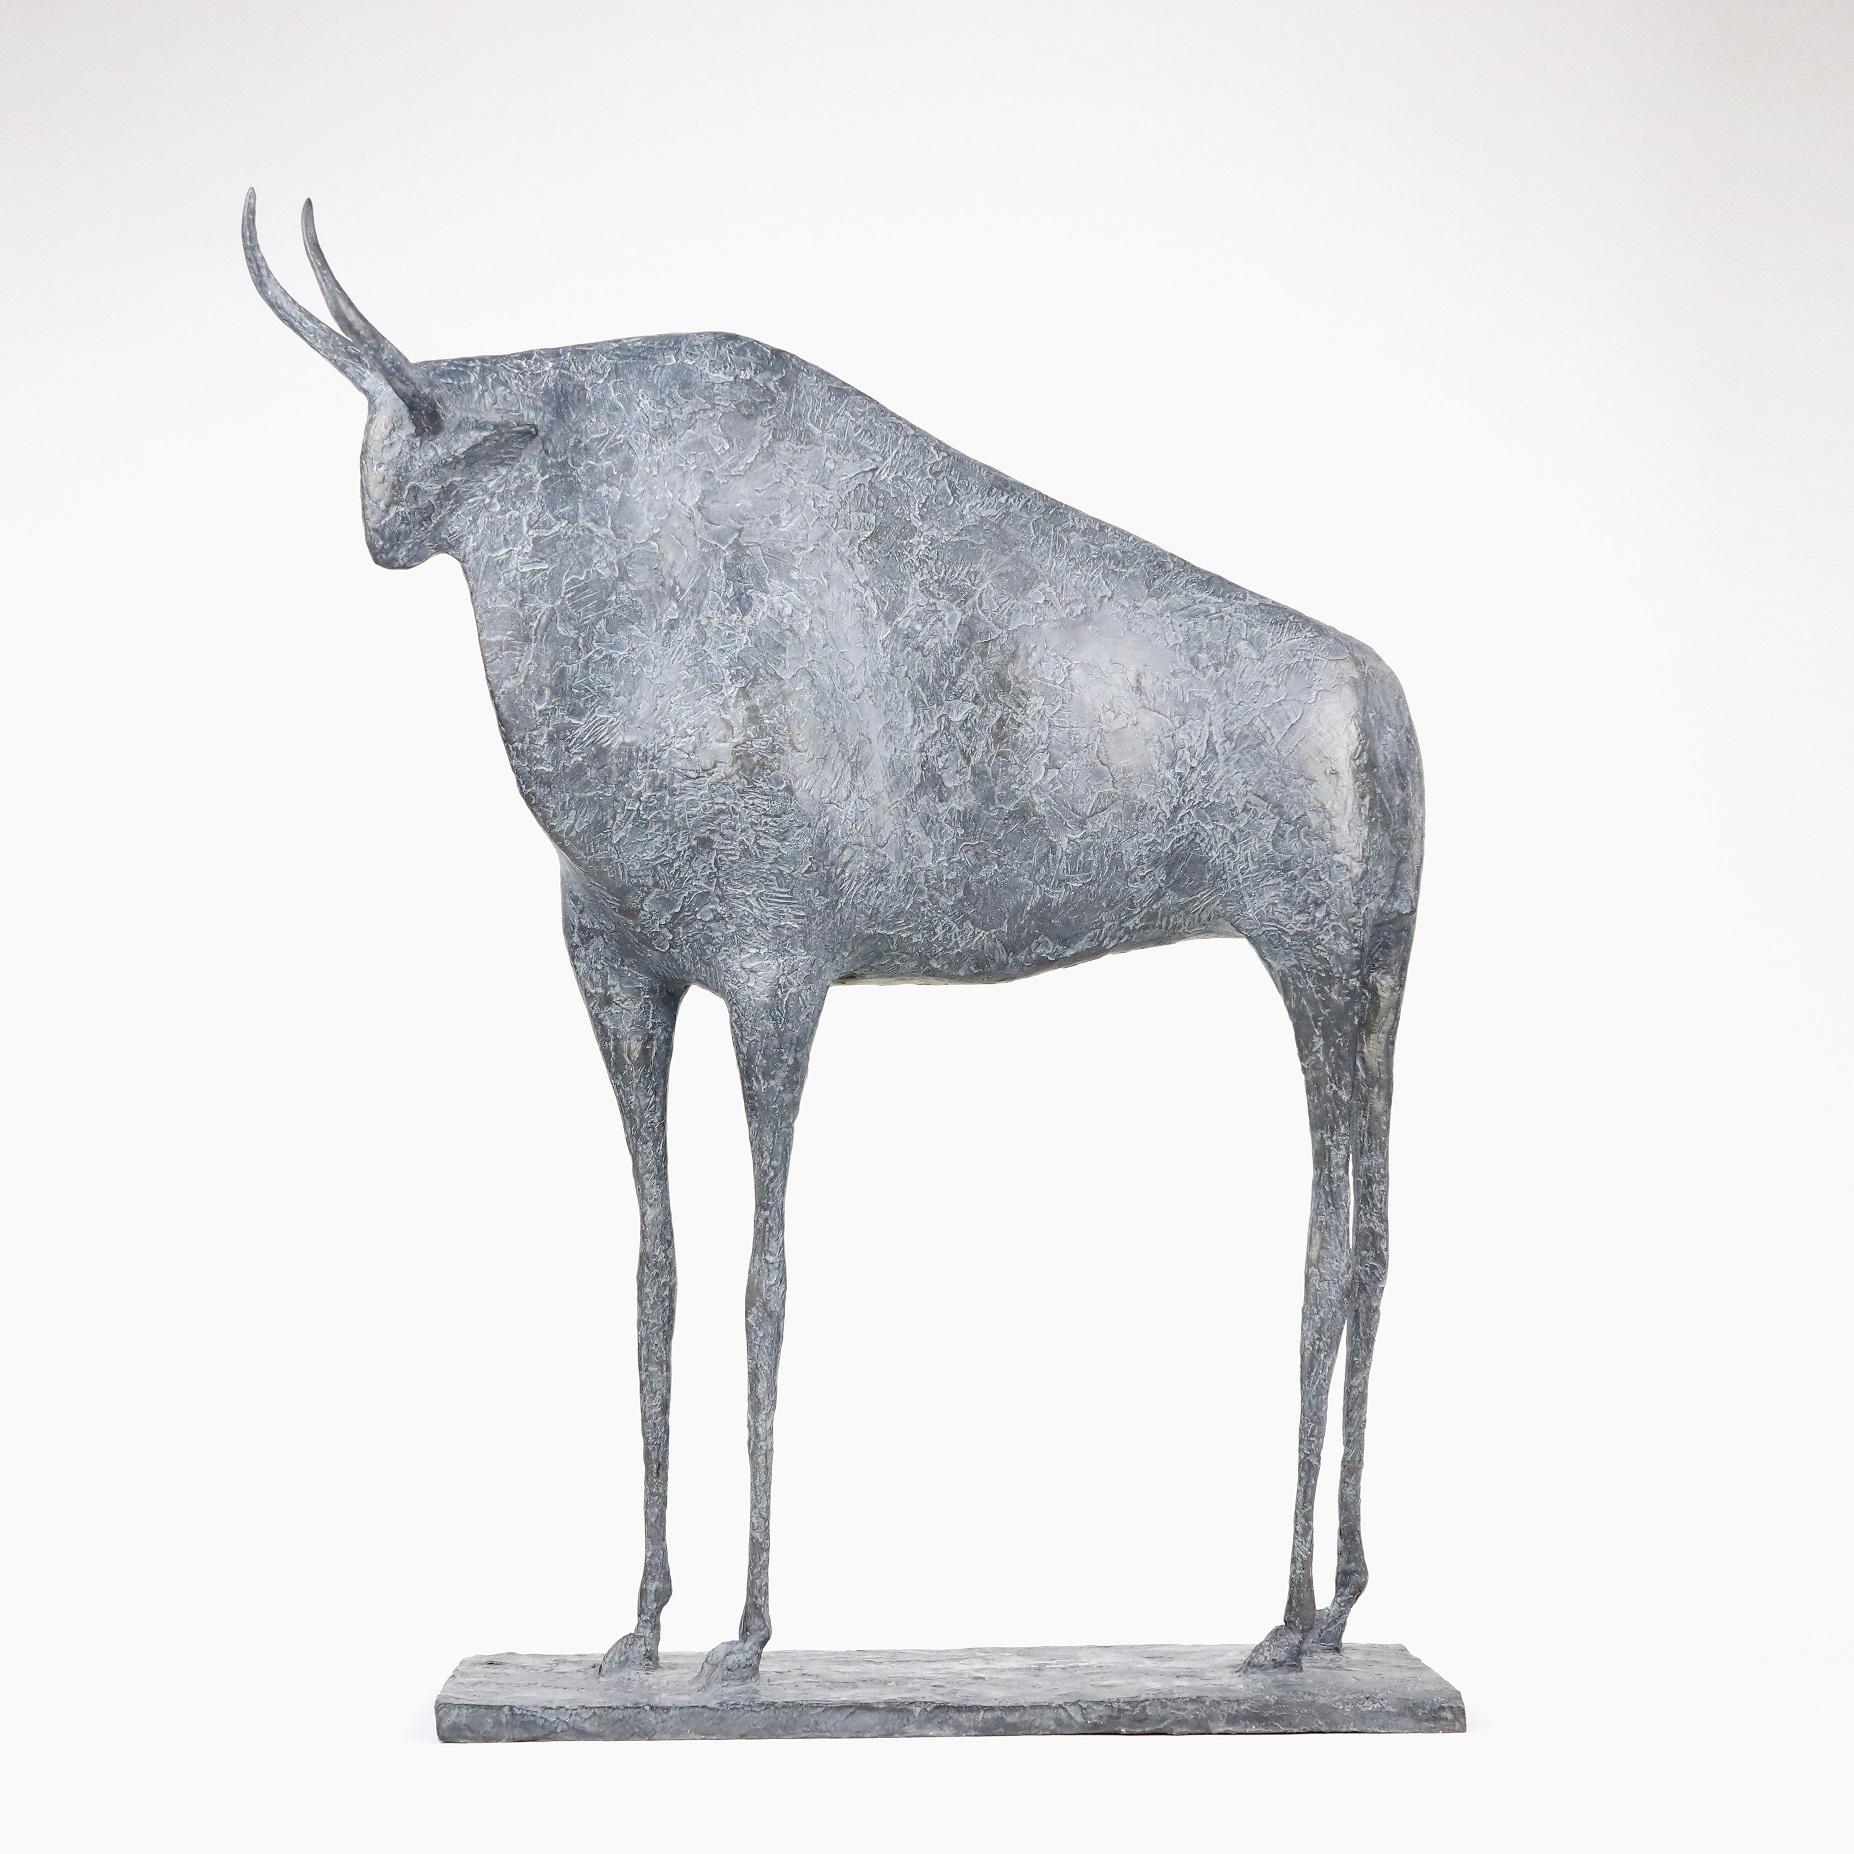 Bull VII (Taureau VII) is a sculpture by French contemporary artist Pierre Yermia.
"The bull is the only masculine animal in my bestiary. His silent and serene presence imposes itself by his massive torso, supported by long legs which emphasize the